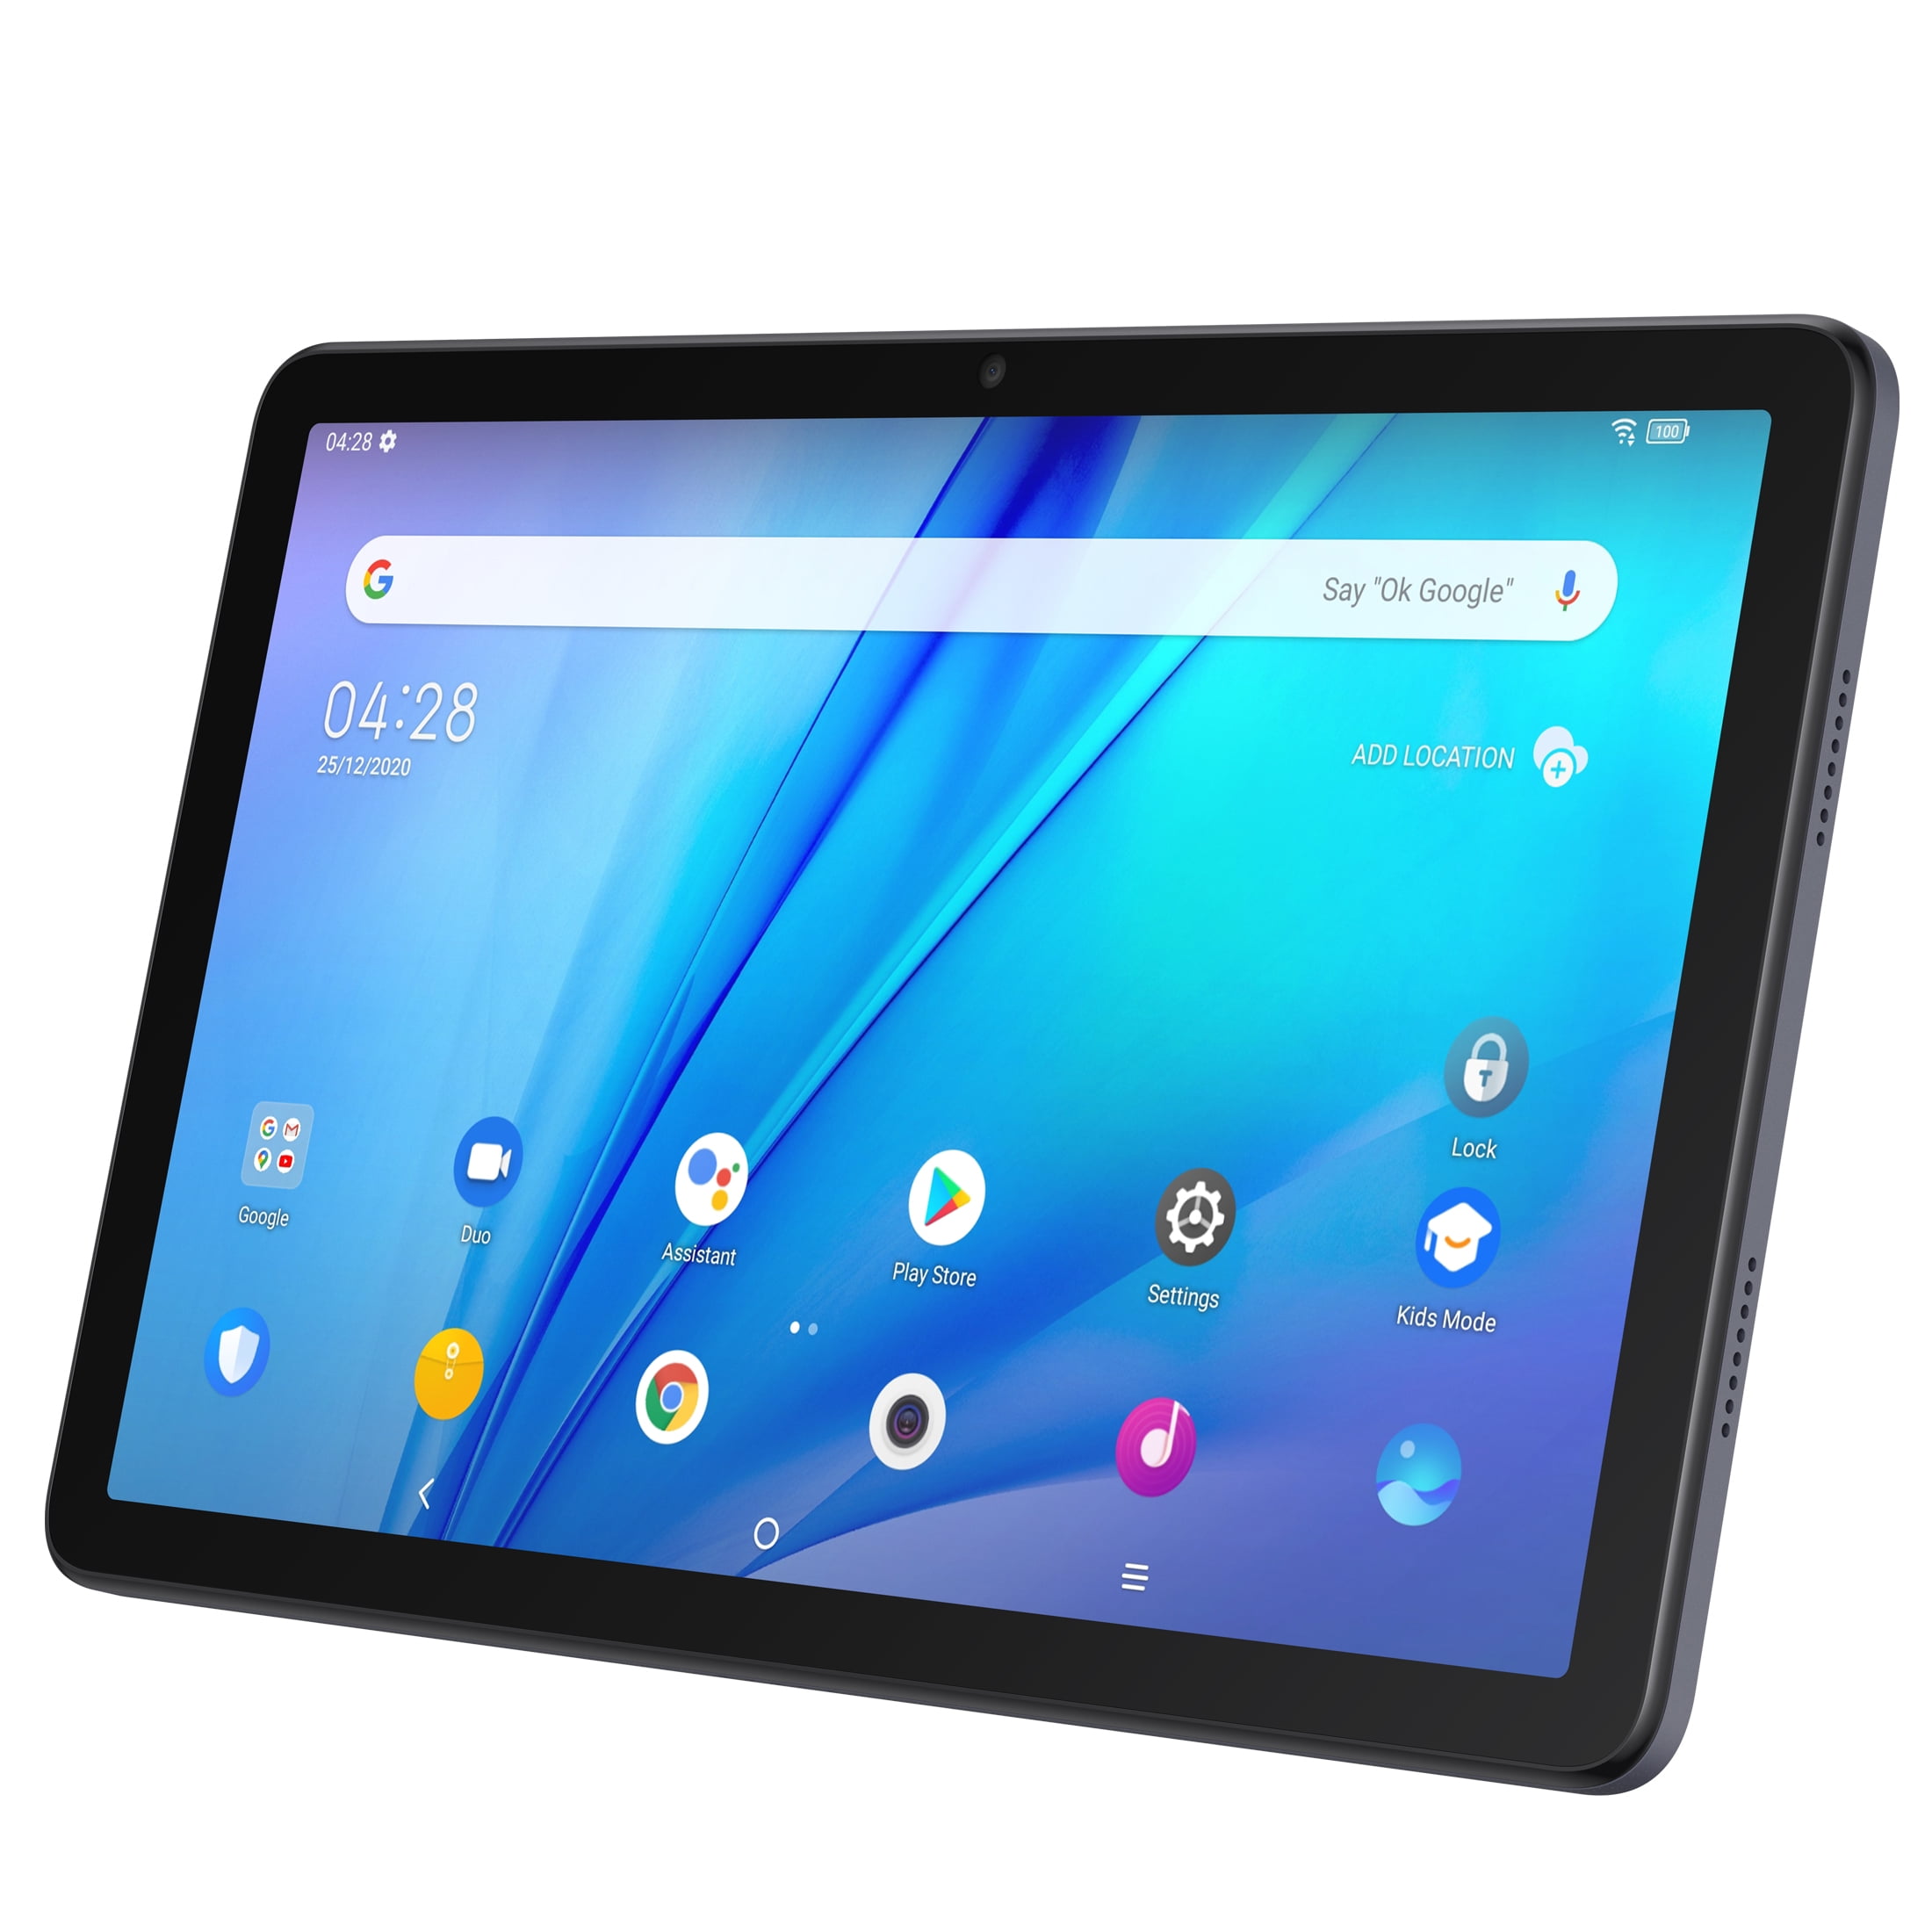 TCL launches another affordable Android tablet in the US - PhoneArena